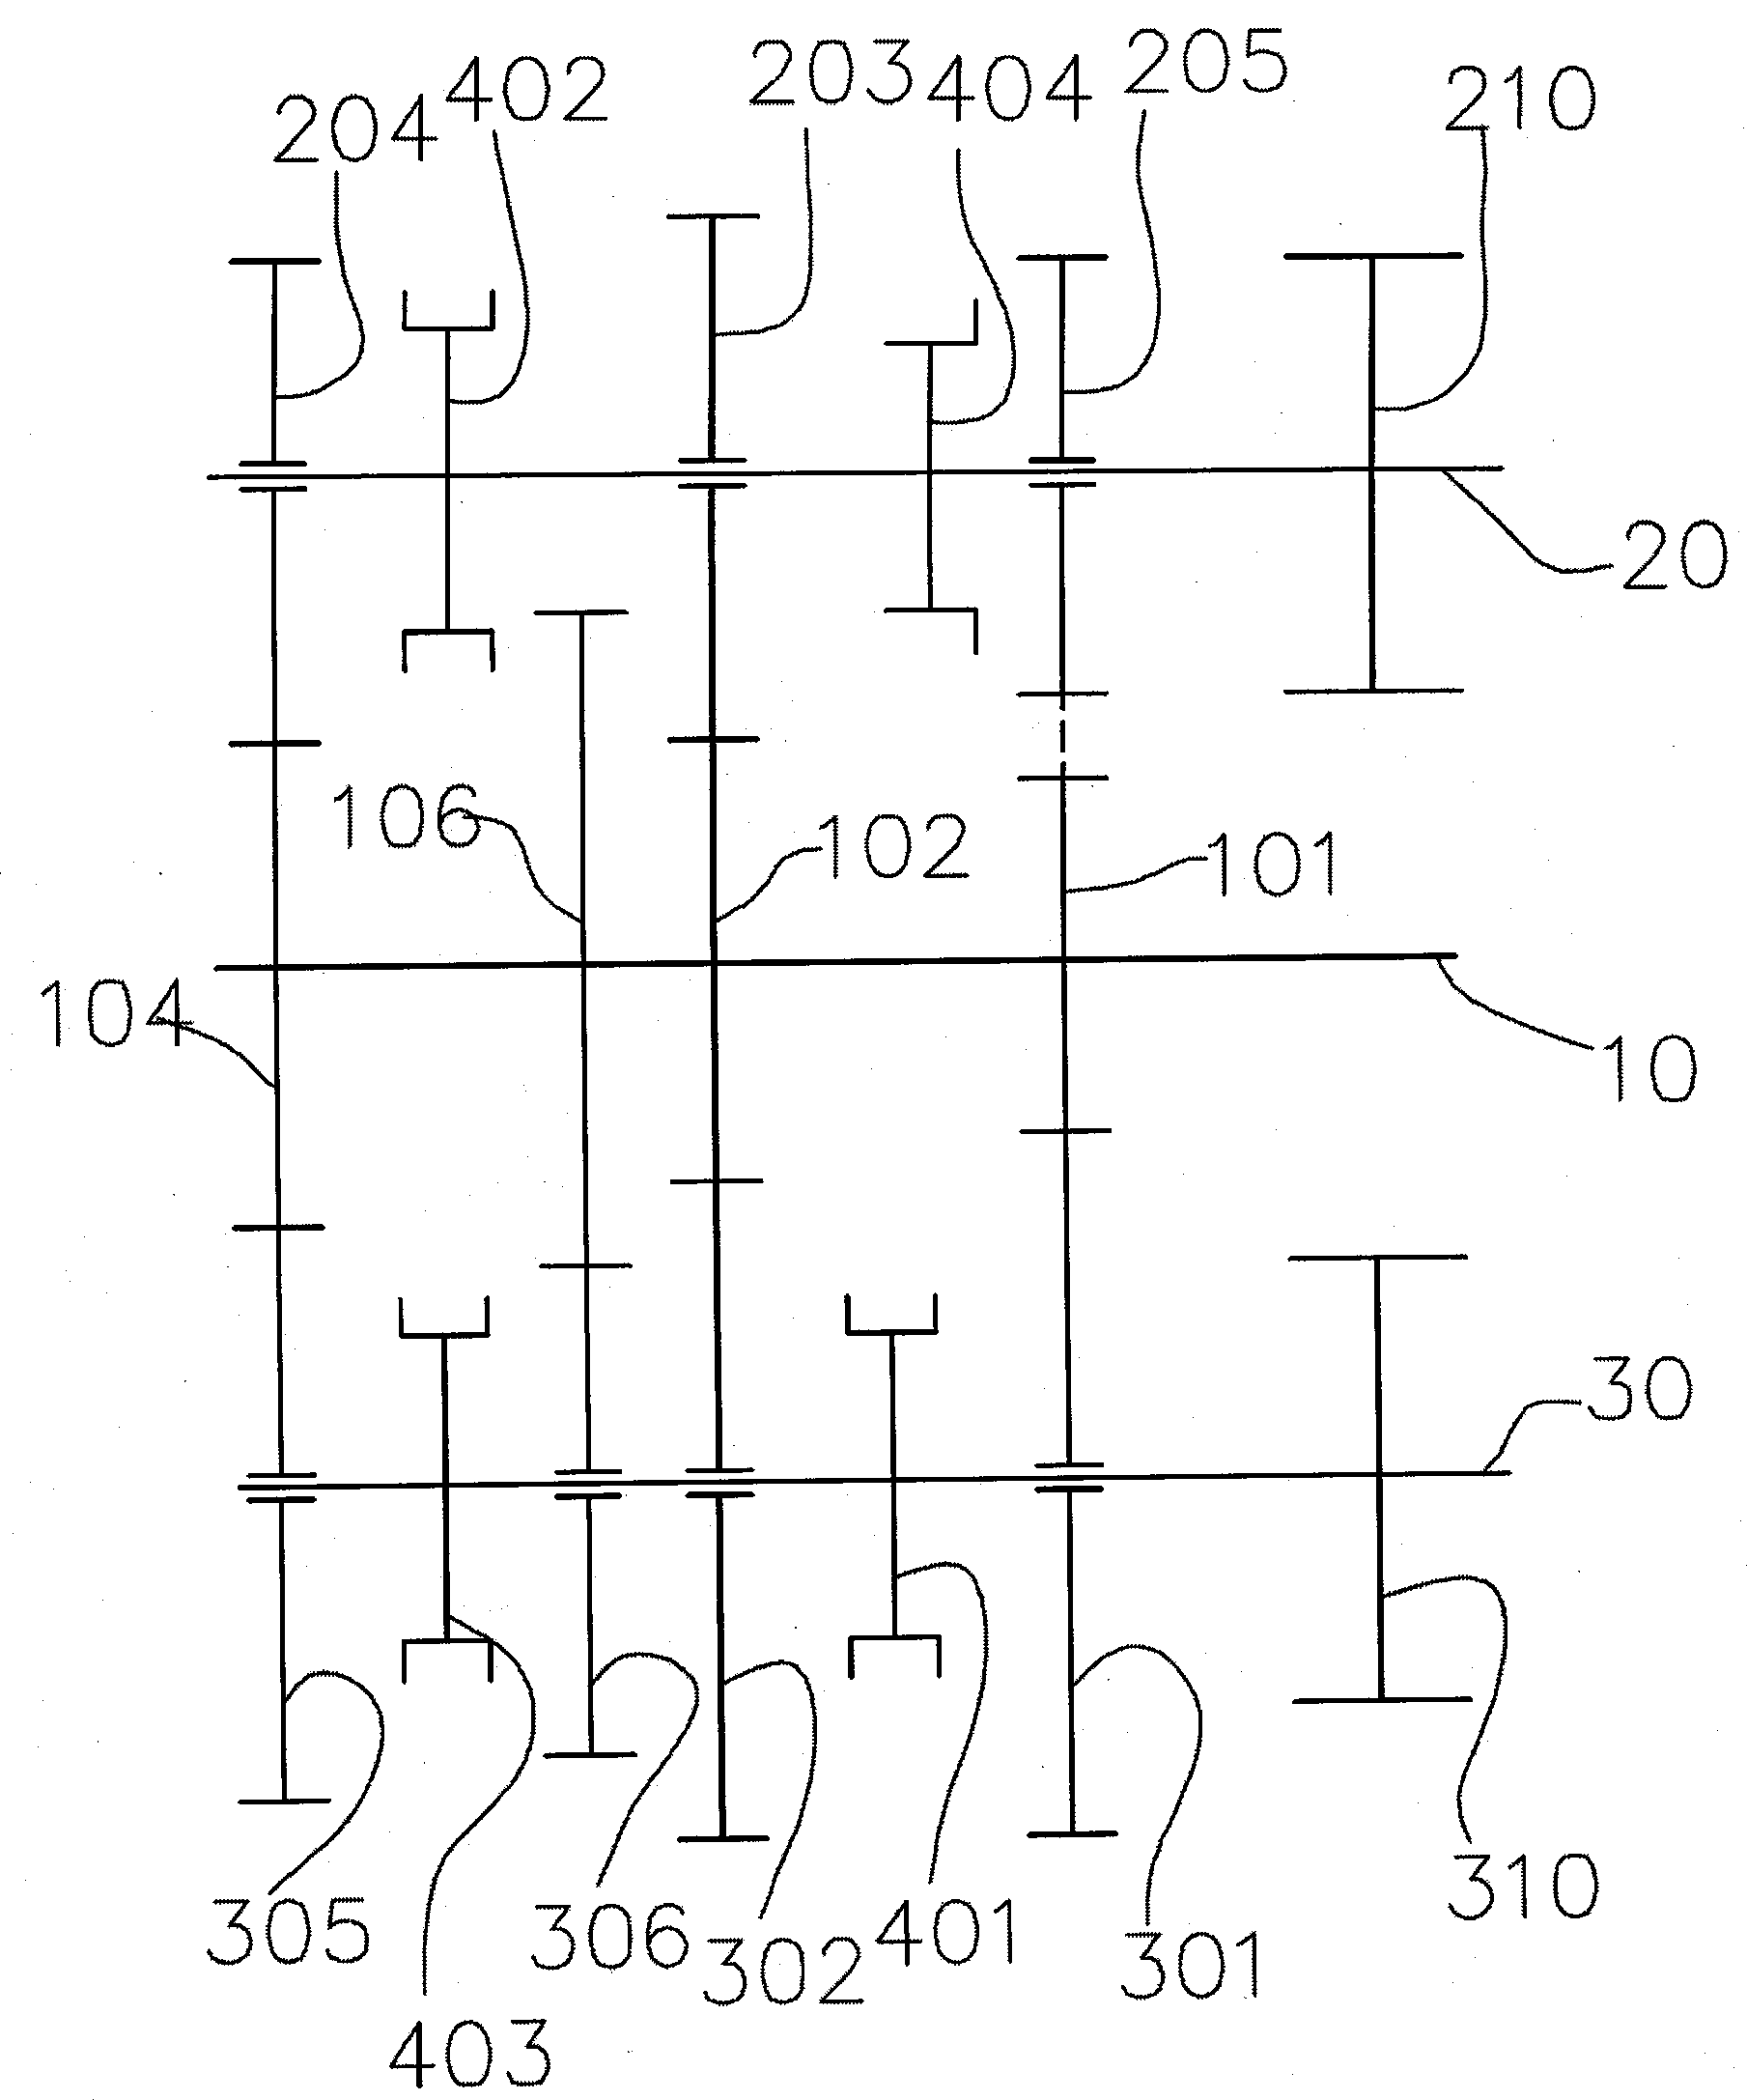 Arrangement structure of gear shaft system of gearbox